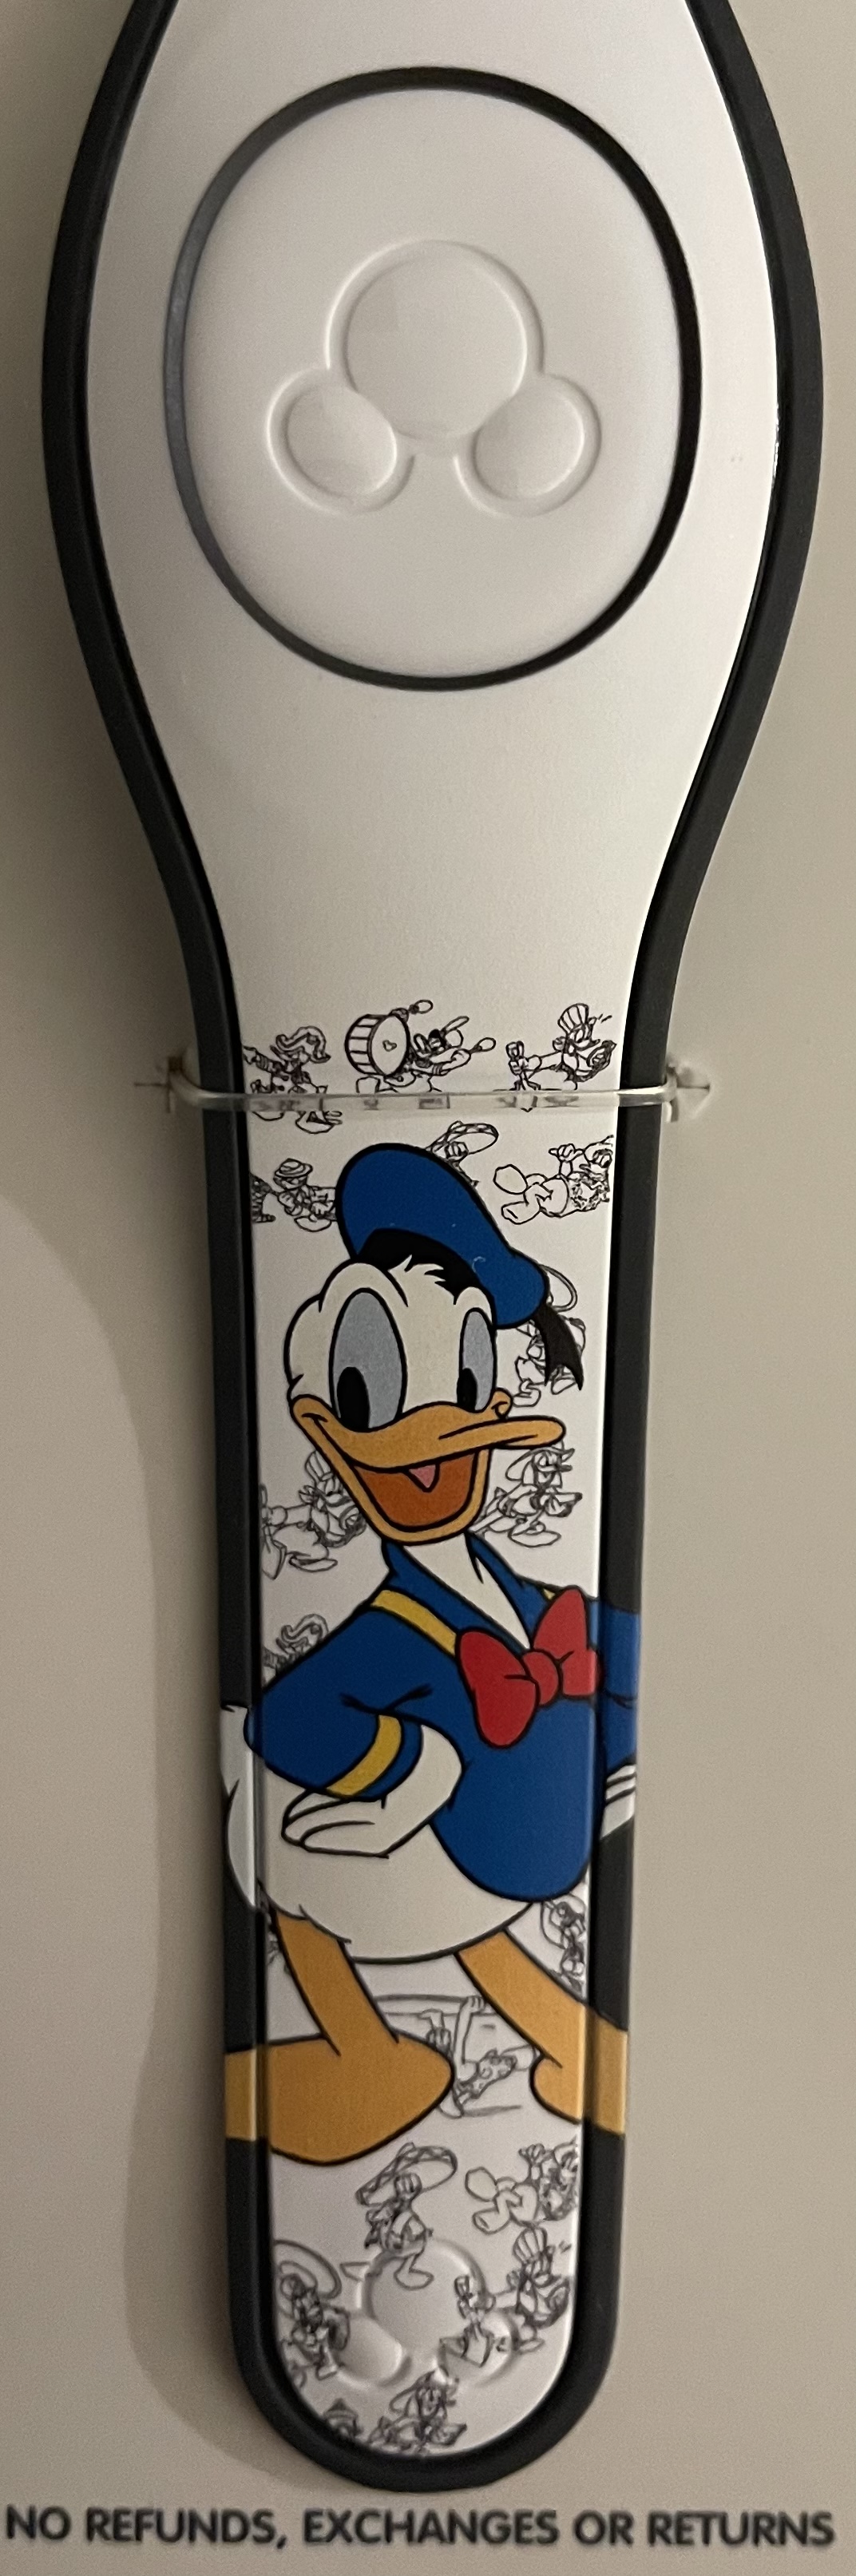 A new Donald Duck Open Edition MagicBand was released today